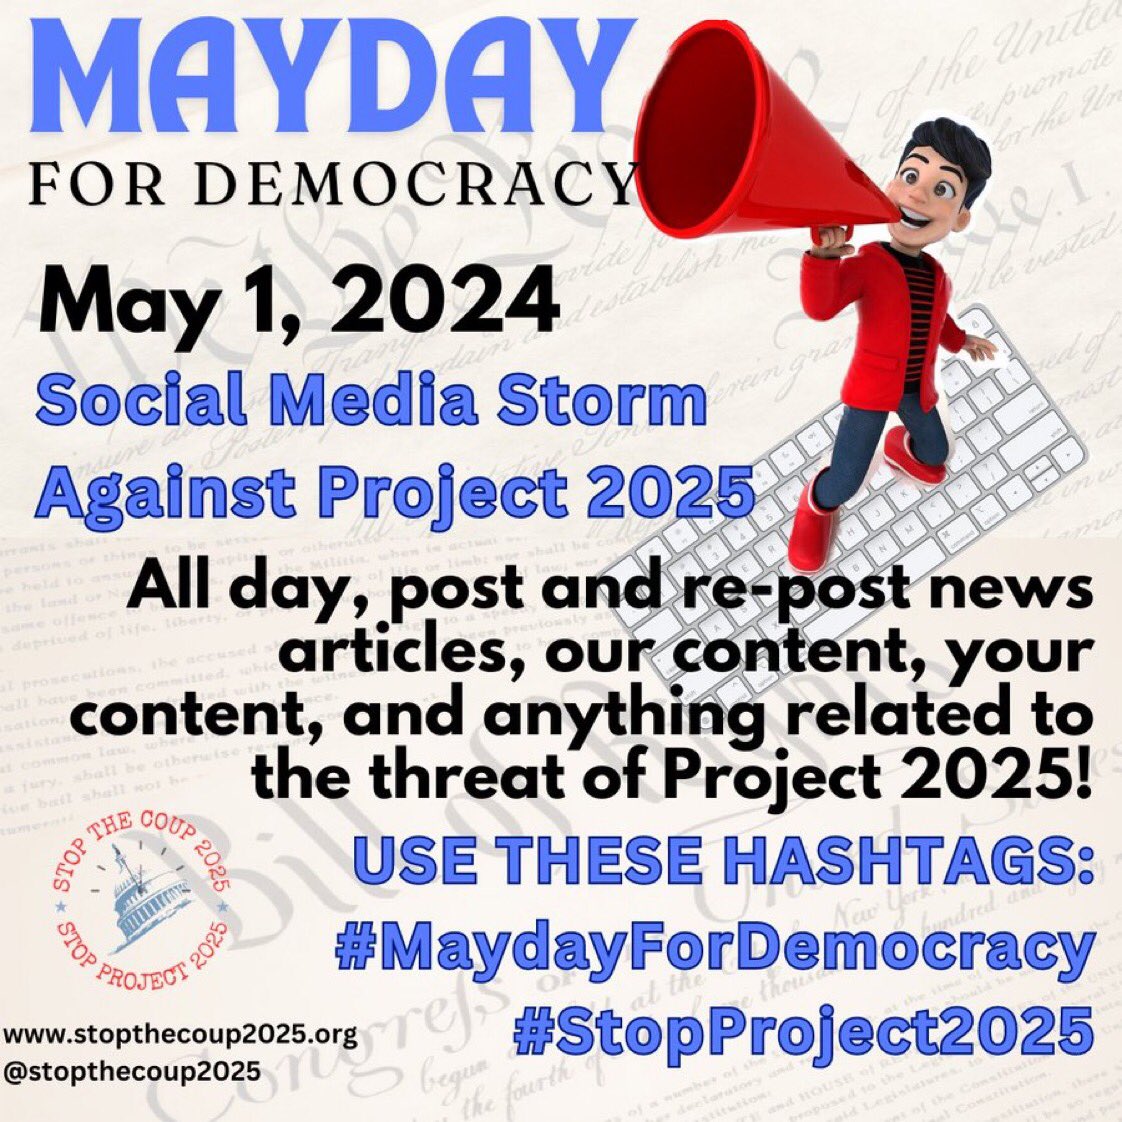 #MaydayForDemocracy #StopProject2025 
It's not over-the-top dramatic rhetoric to call out #Project2025 for what it is, the blueprint for autocracy & the stripping away of rights/freedom. Anyone who claims to support freedom/rights can not support conservatives/republicans & this.